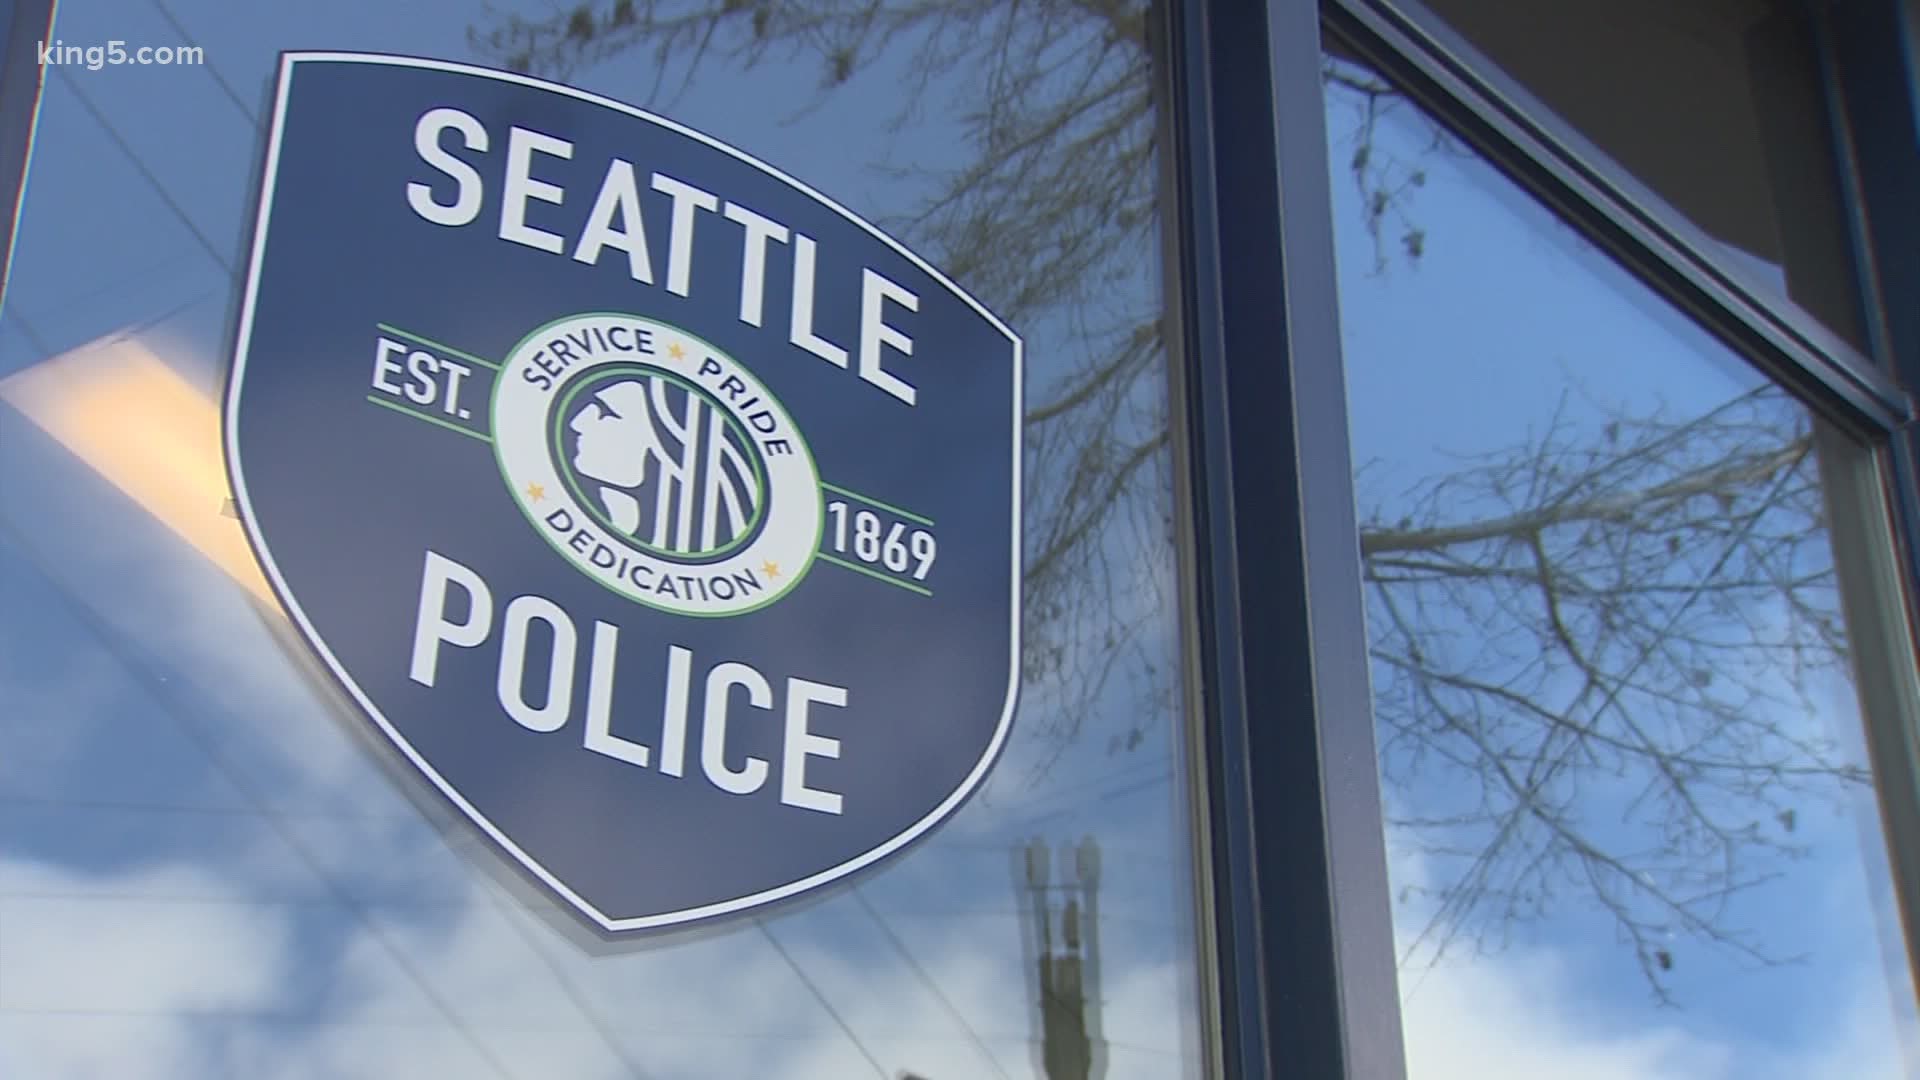 The Seattle City Council will decide whether to override the mayor's veto of bills that would help community programs and cut money and jobs in the police department